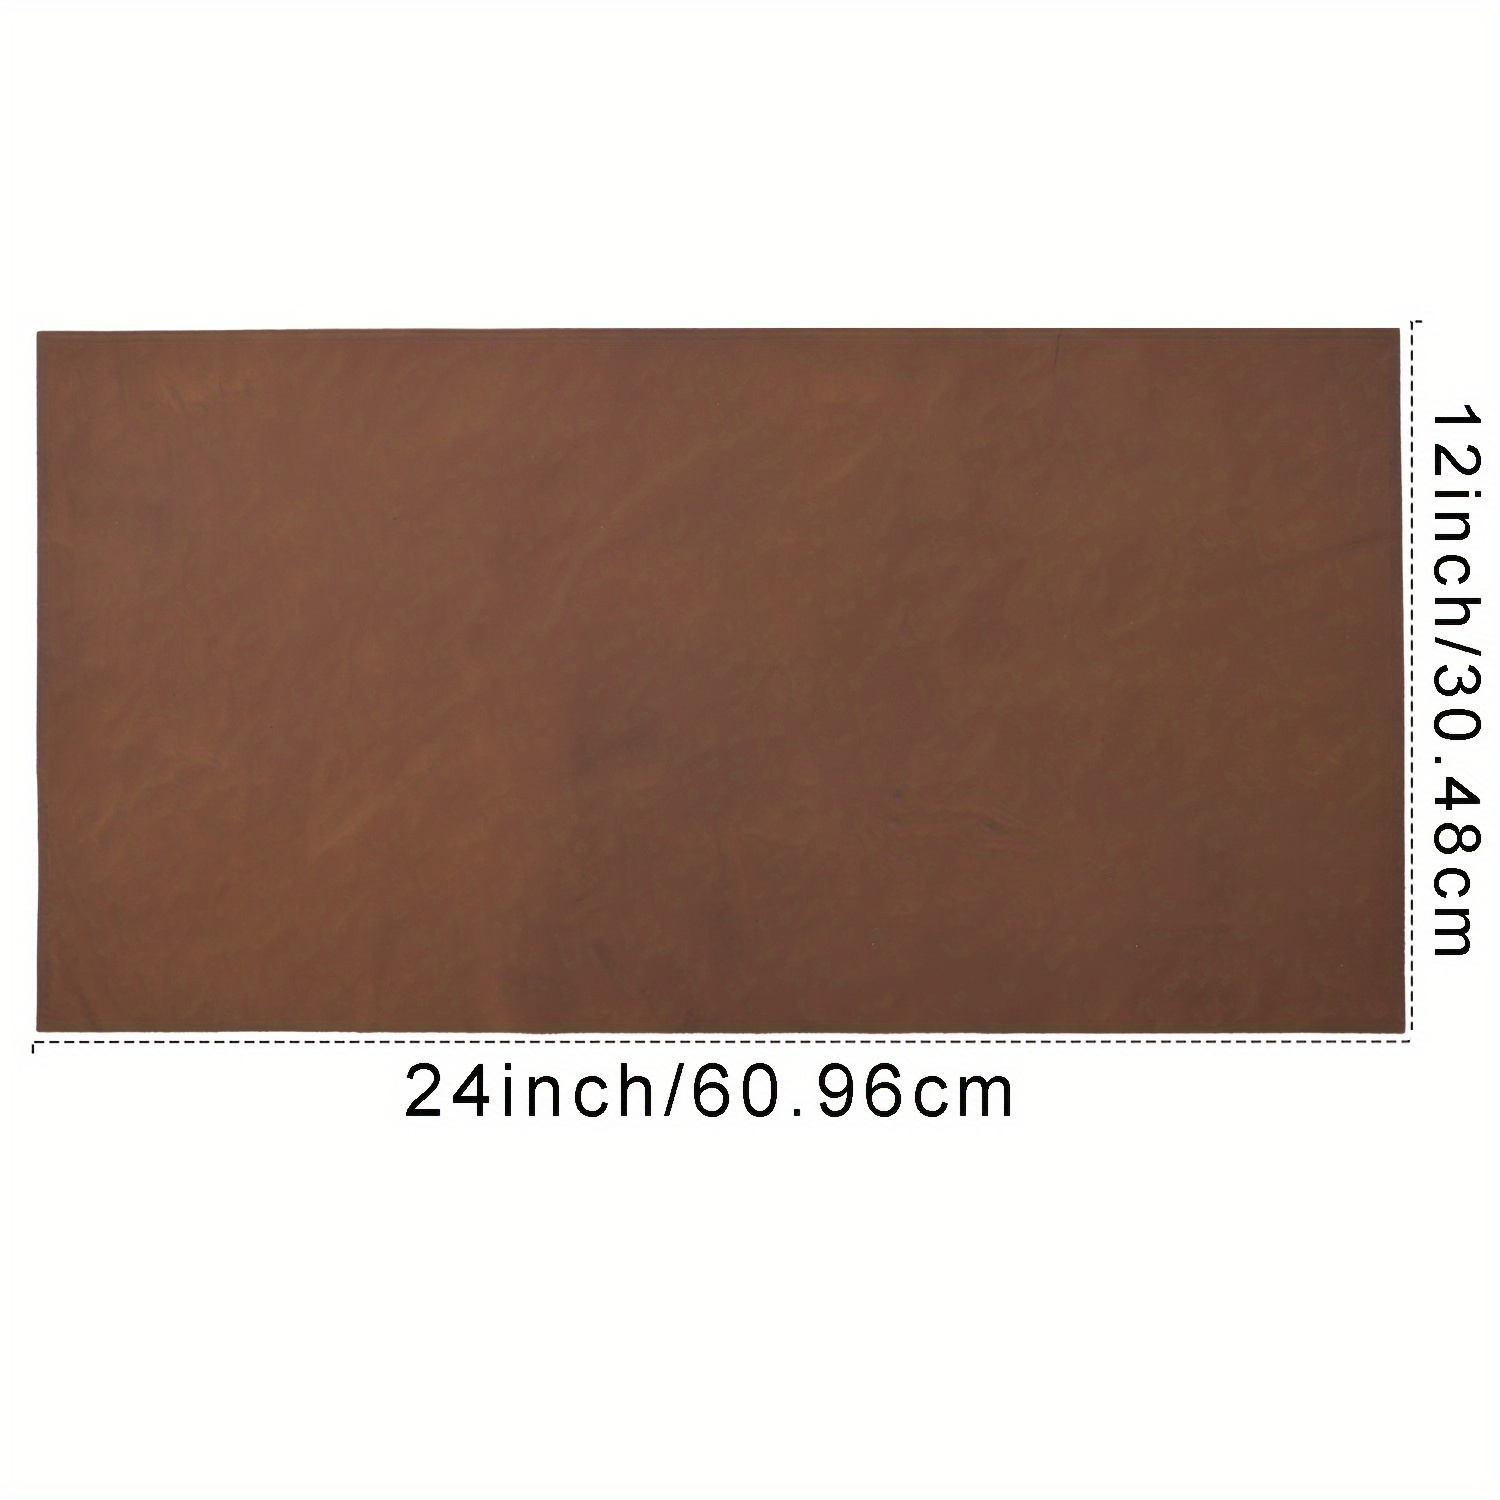 Genuine Leather Tooling & Crafting Sheets